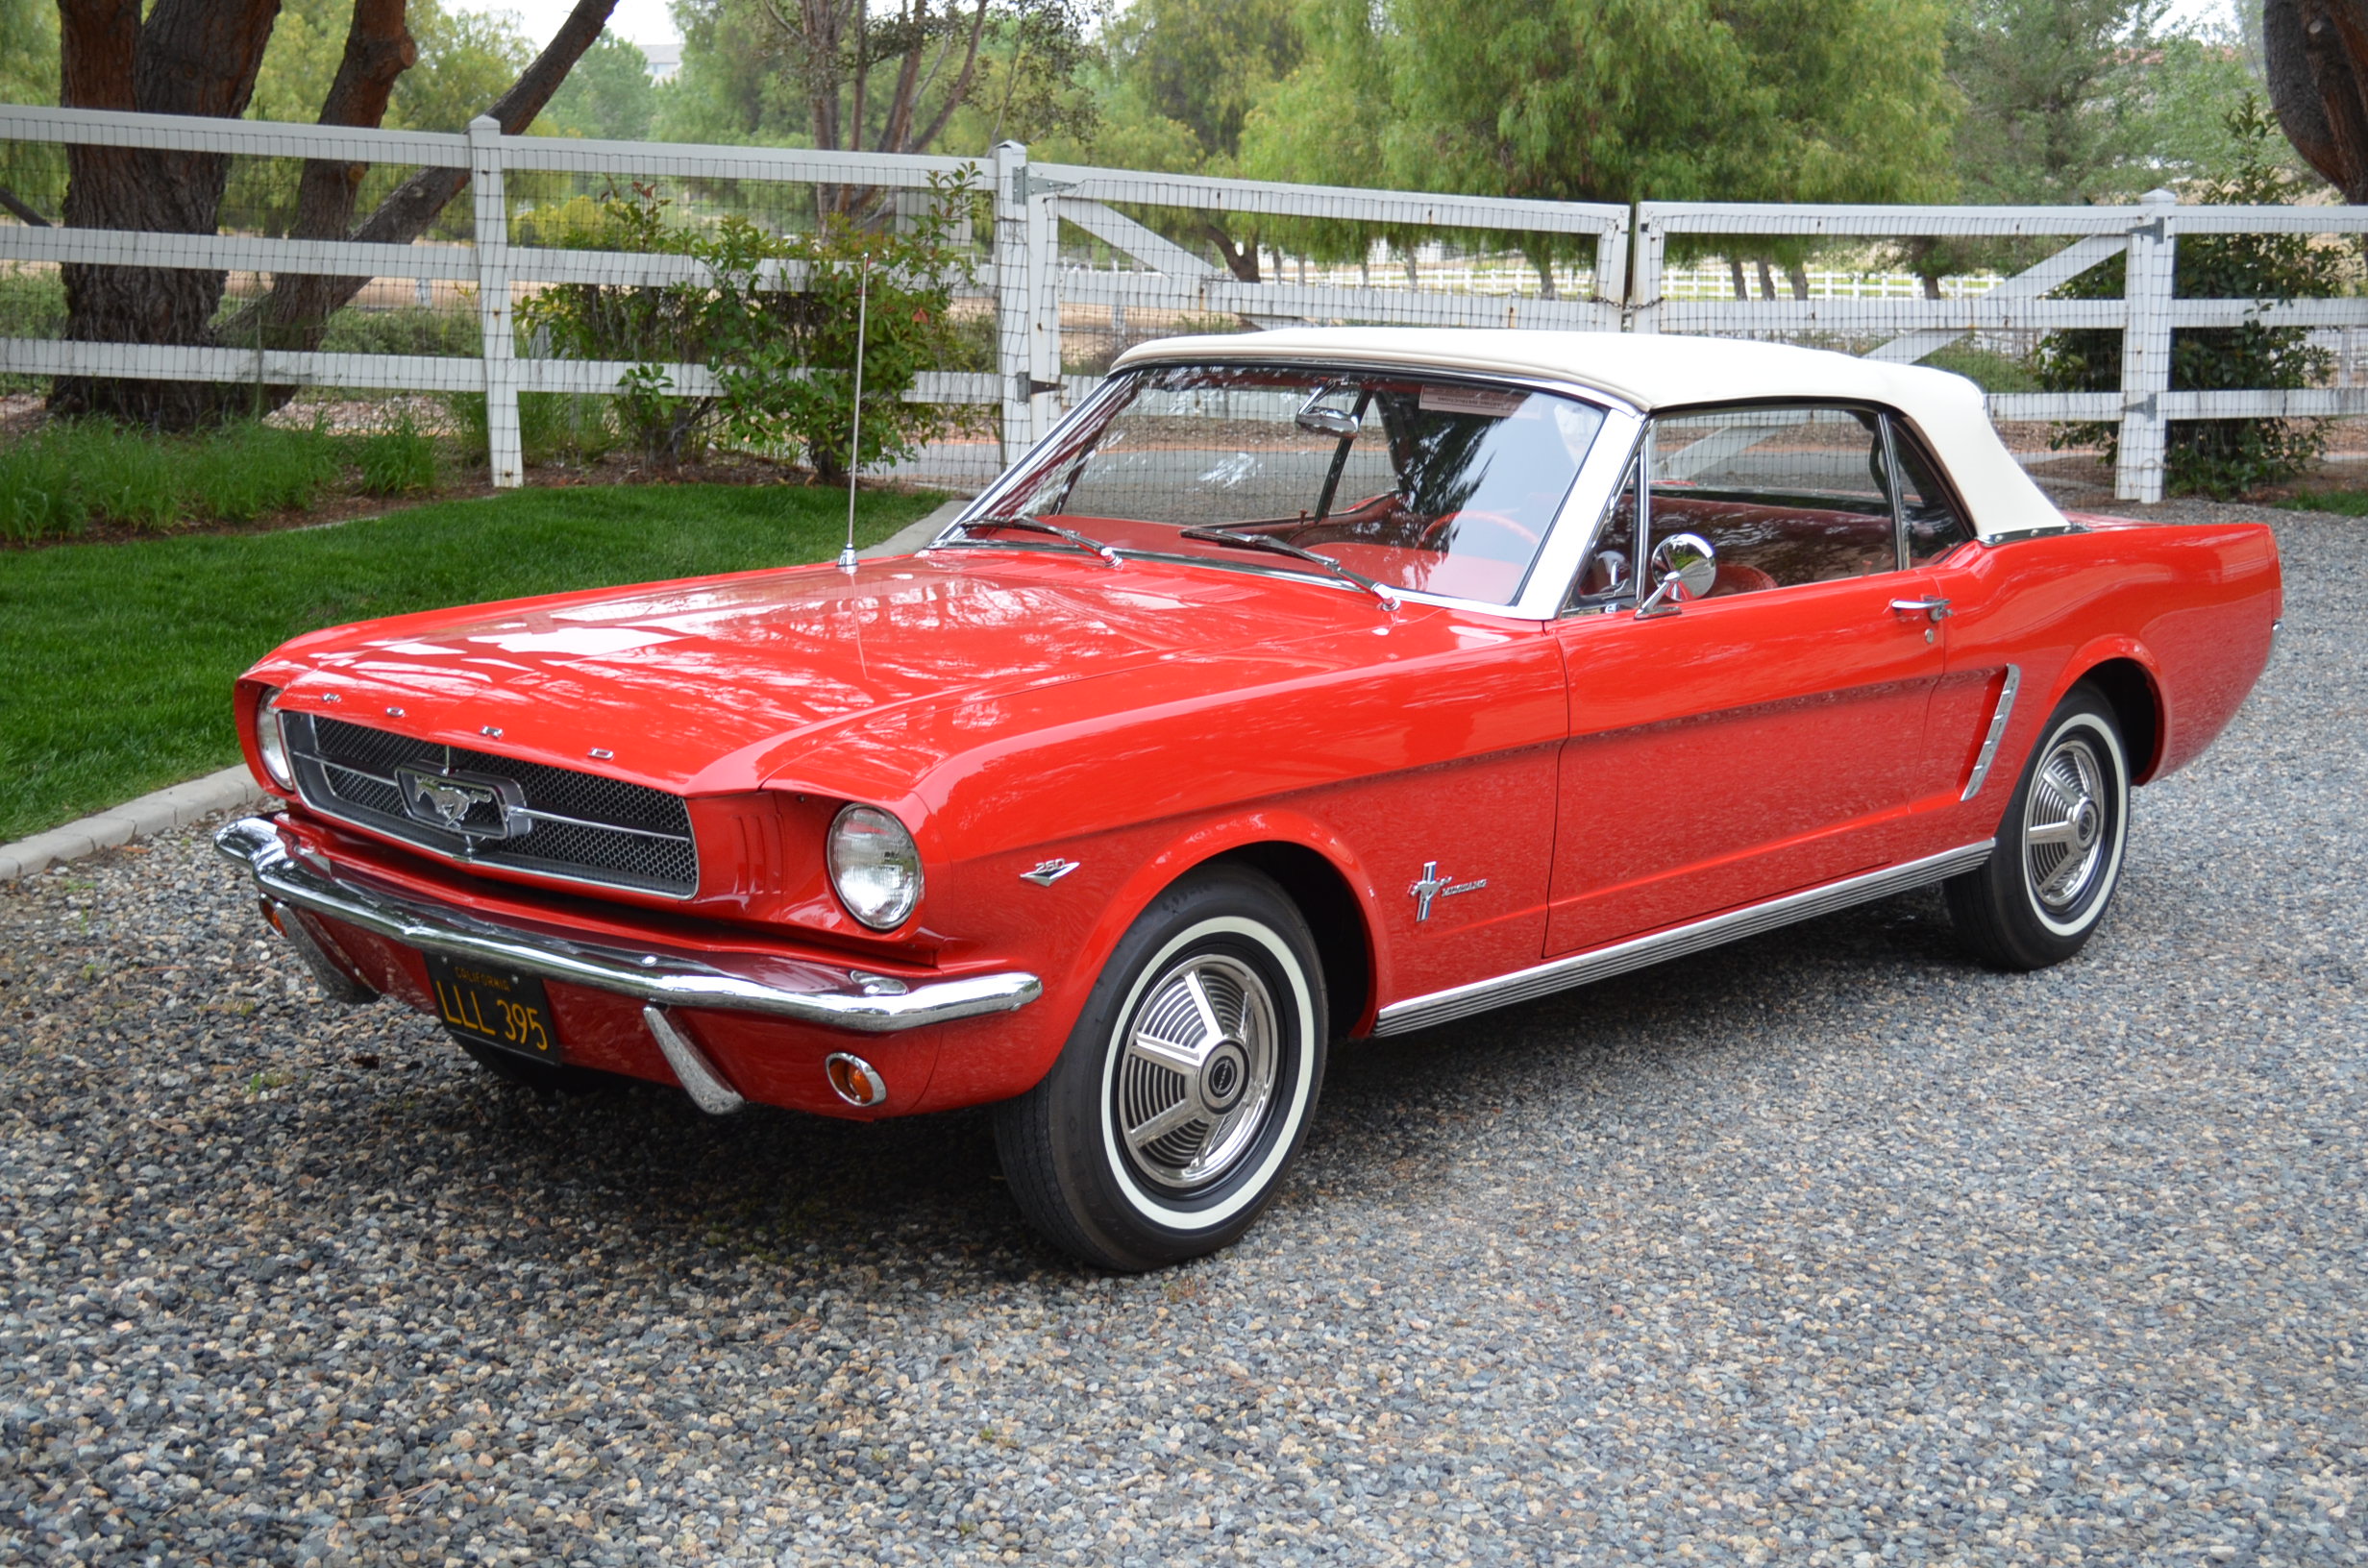 1964 1/2 Mustang Convertible, Gorgeous!! - Classic